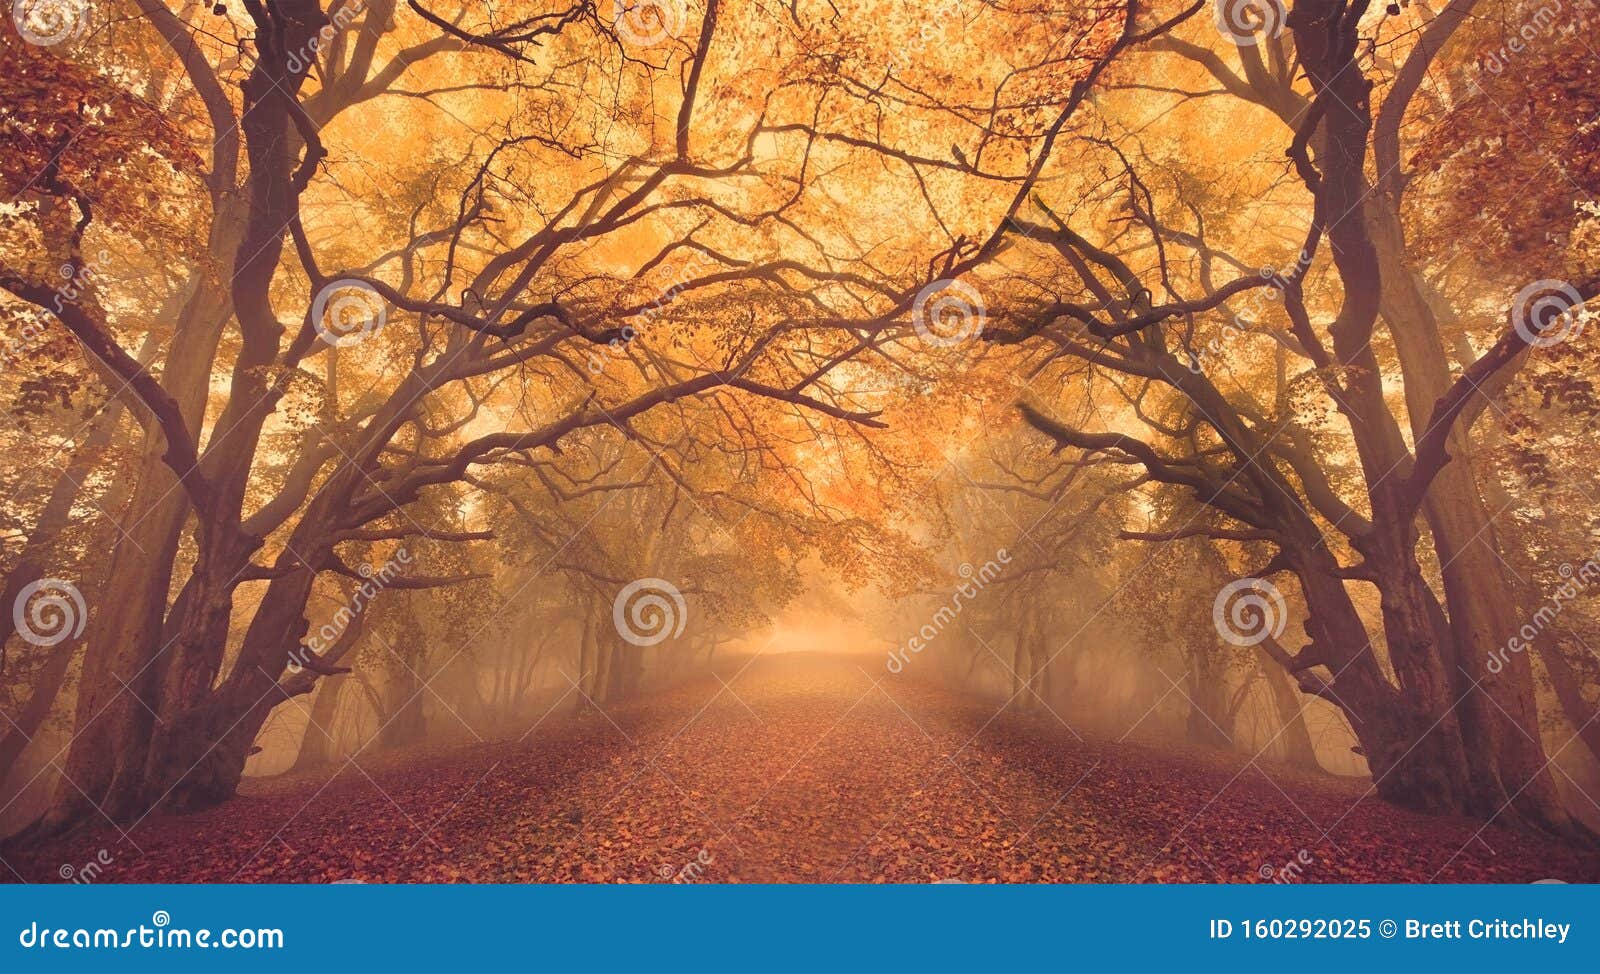 warm glow fall autumn forest woods with path